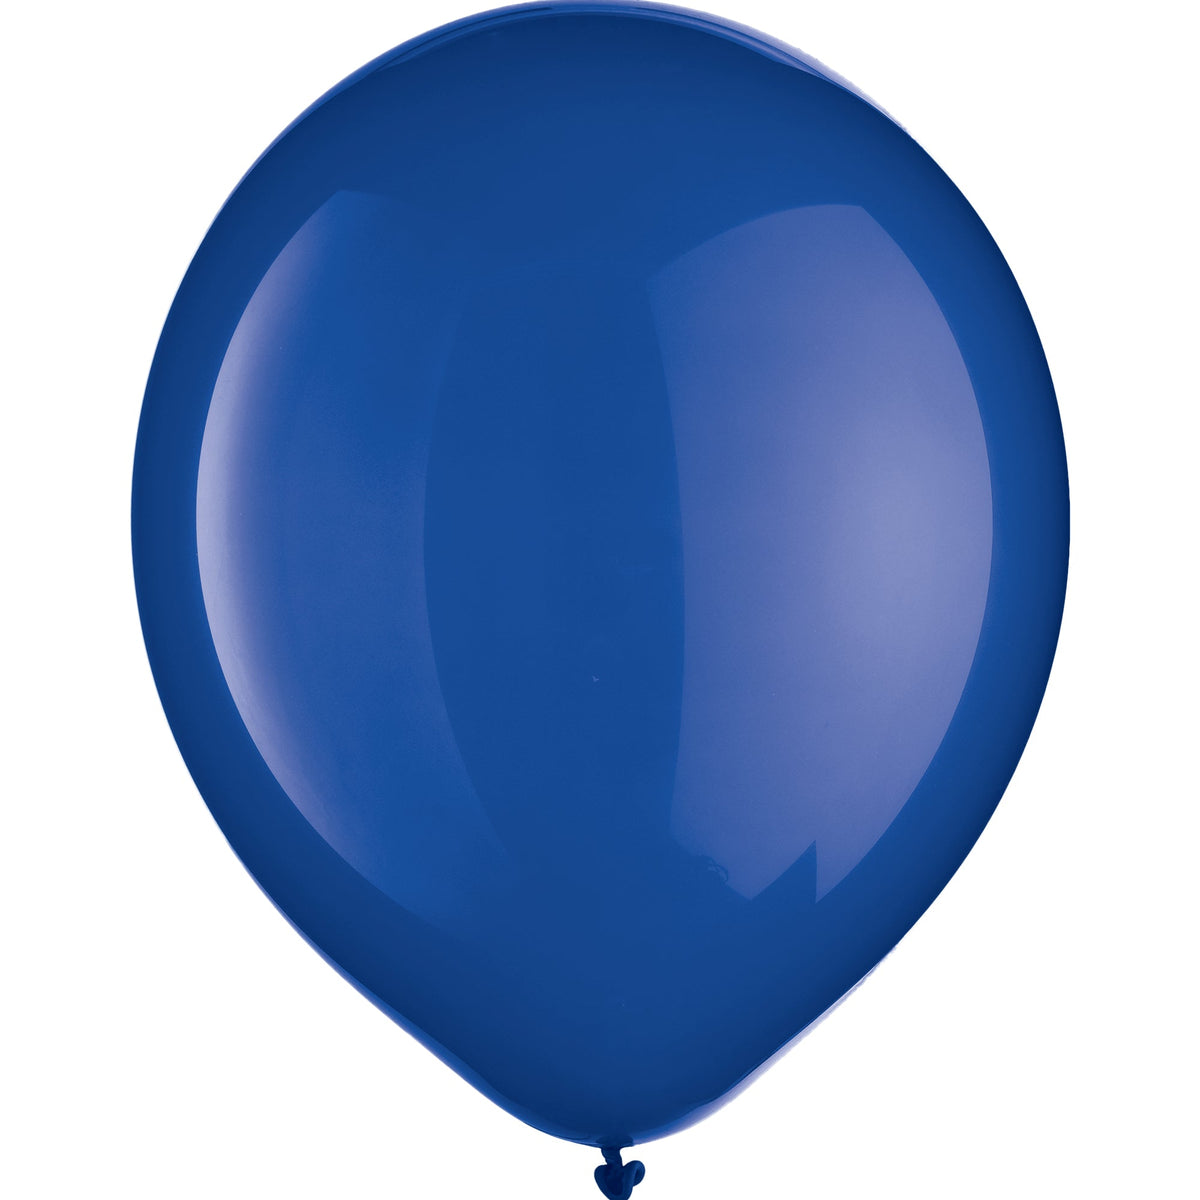 Bright Royal Blue Solid Color 12" helium quality 15 count Latex Balloons